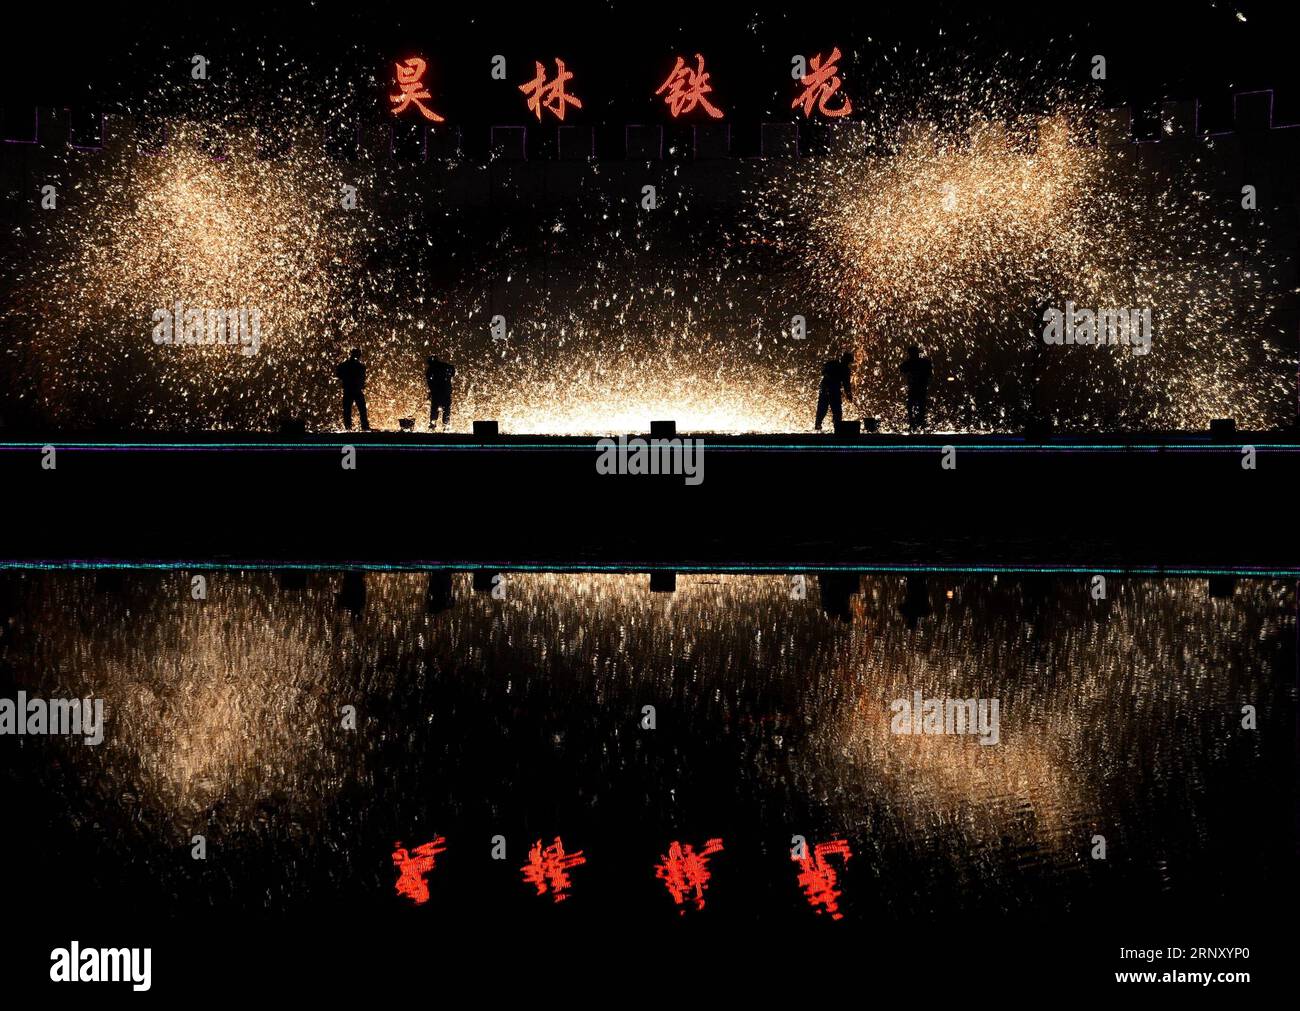 (180218) -- SHIJIAZHUANG, Feb. 18, 2018 -- Sparks pour down as performers spray burning iron chips to shower sparks-like fireworks in Cixian County, north China s Hebei Province, Feb. 17, 2018. The performance was held to celebrate the Spring Festival, or the Chinese Lunar New Year, which fell on Feb. 16 this year. ) (ry) CHINA-HEBEI-IRON SPARKS (CN) WangxXiao PUBLICATIONxNOTxINxCHN Stock Photo